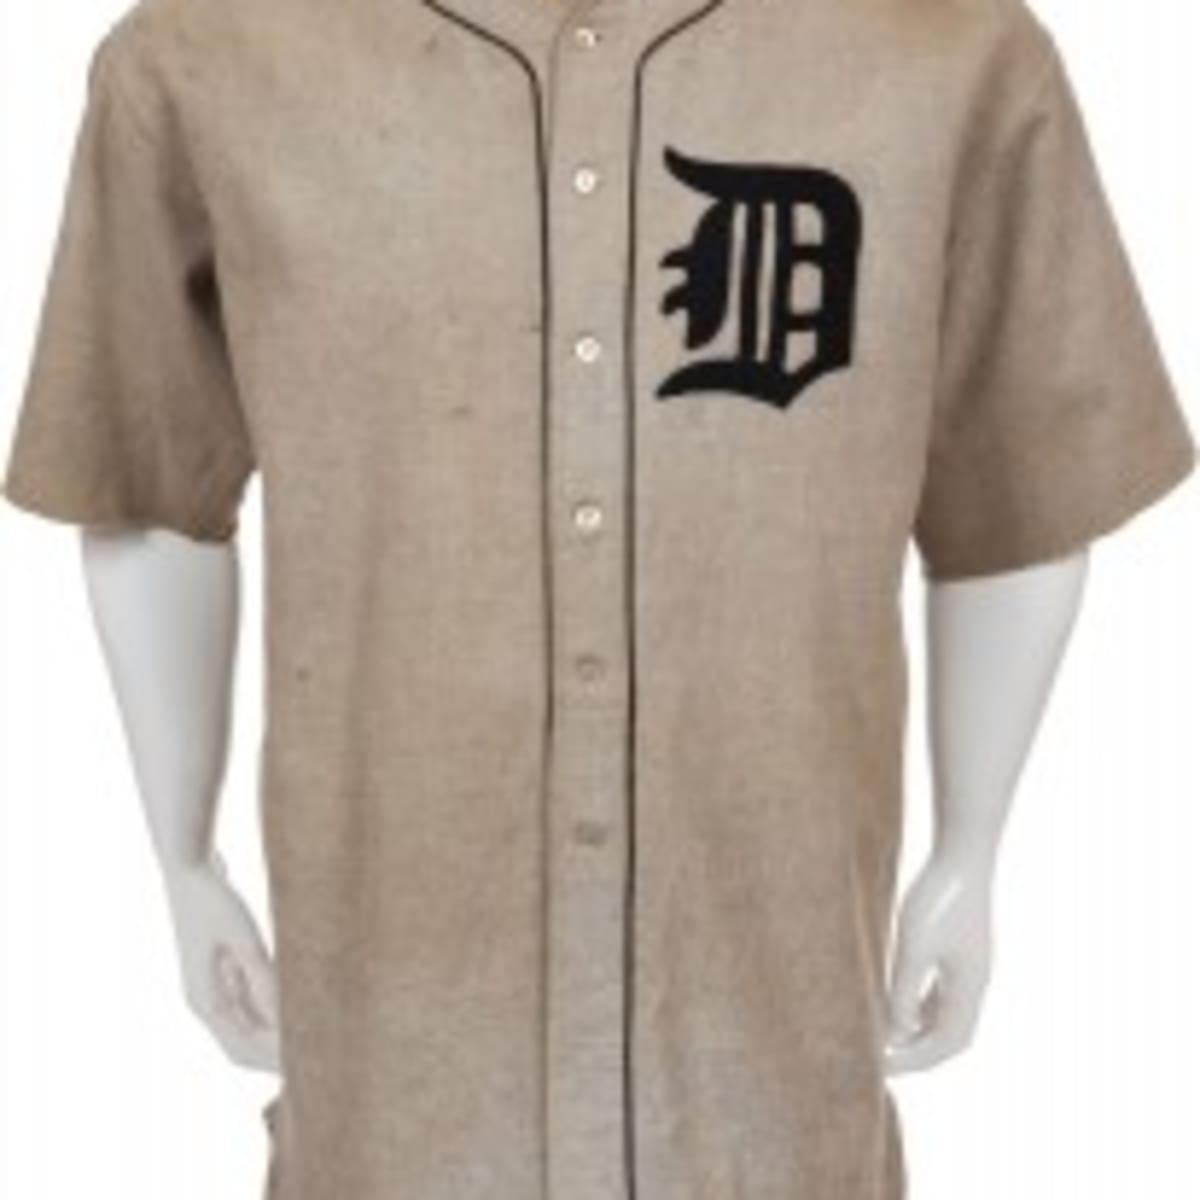 ty cobb jersey number